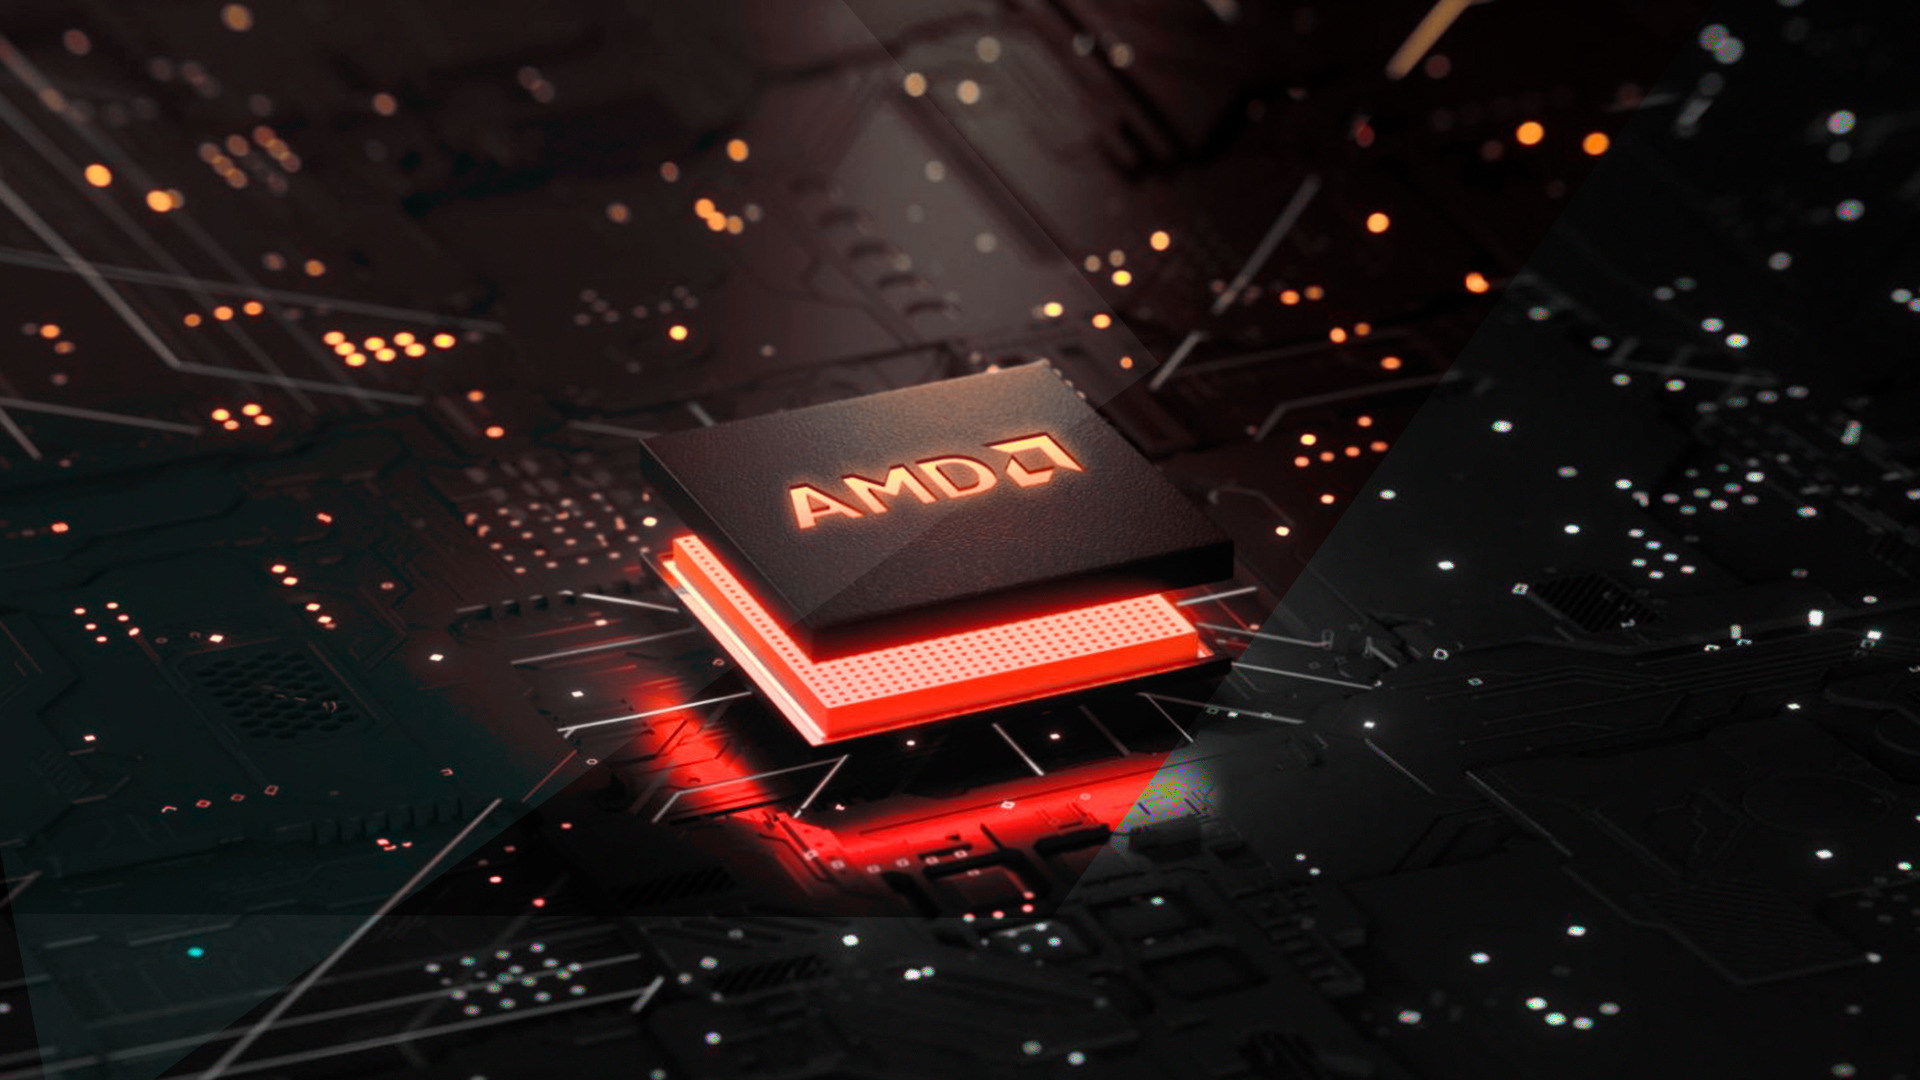 Exam AMD comments on USB 500 series issues